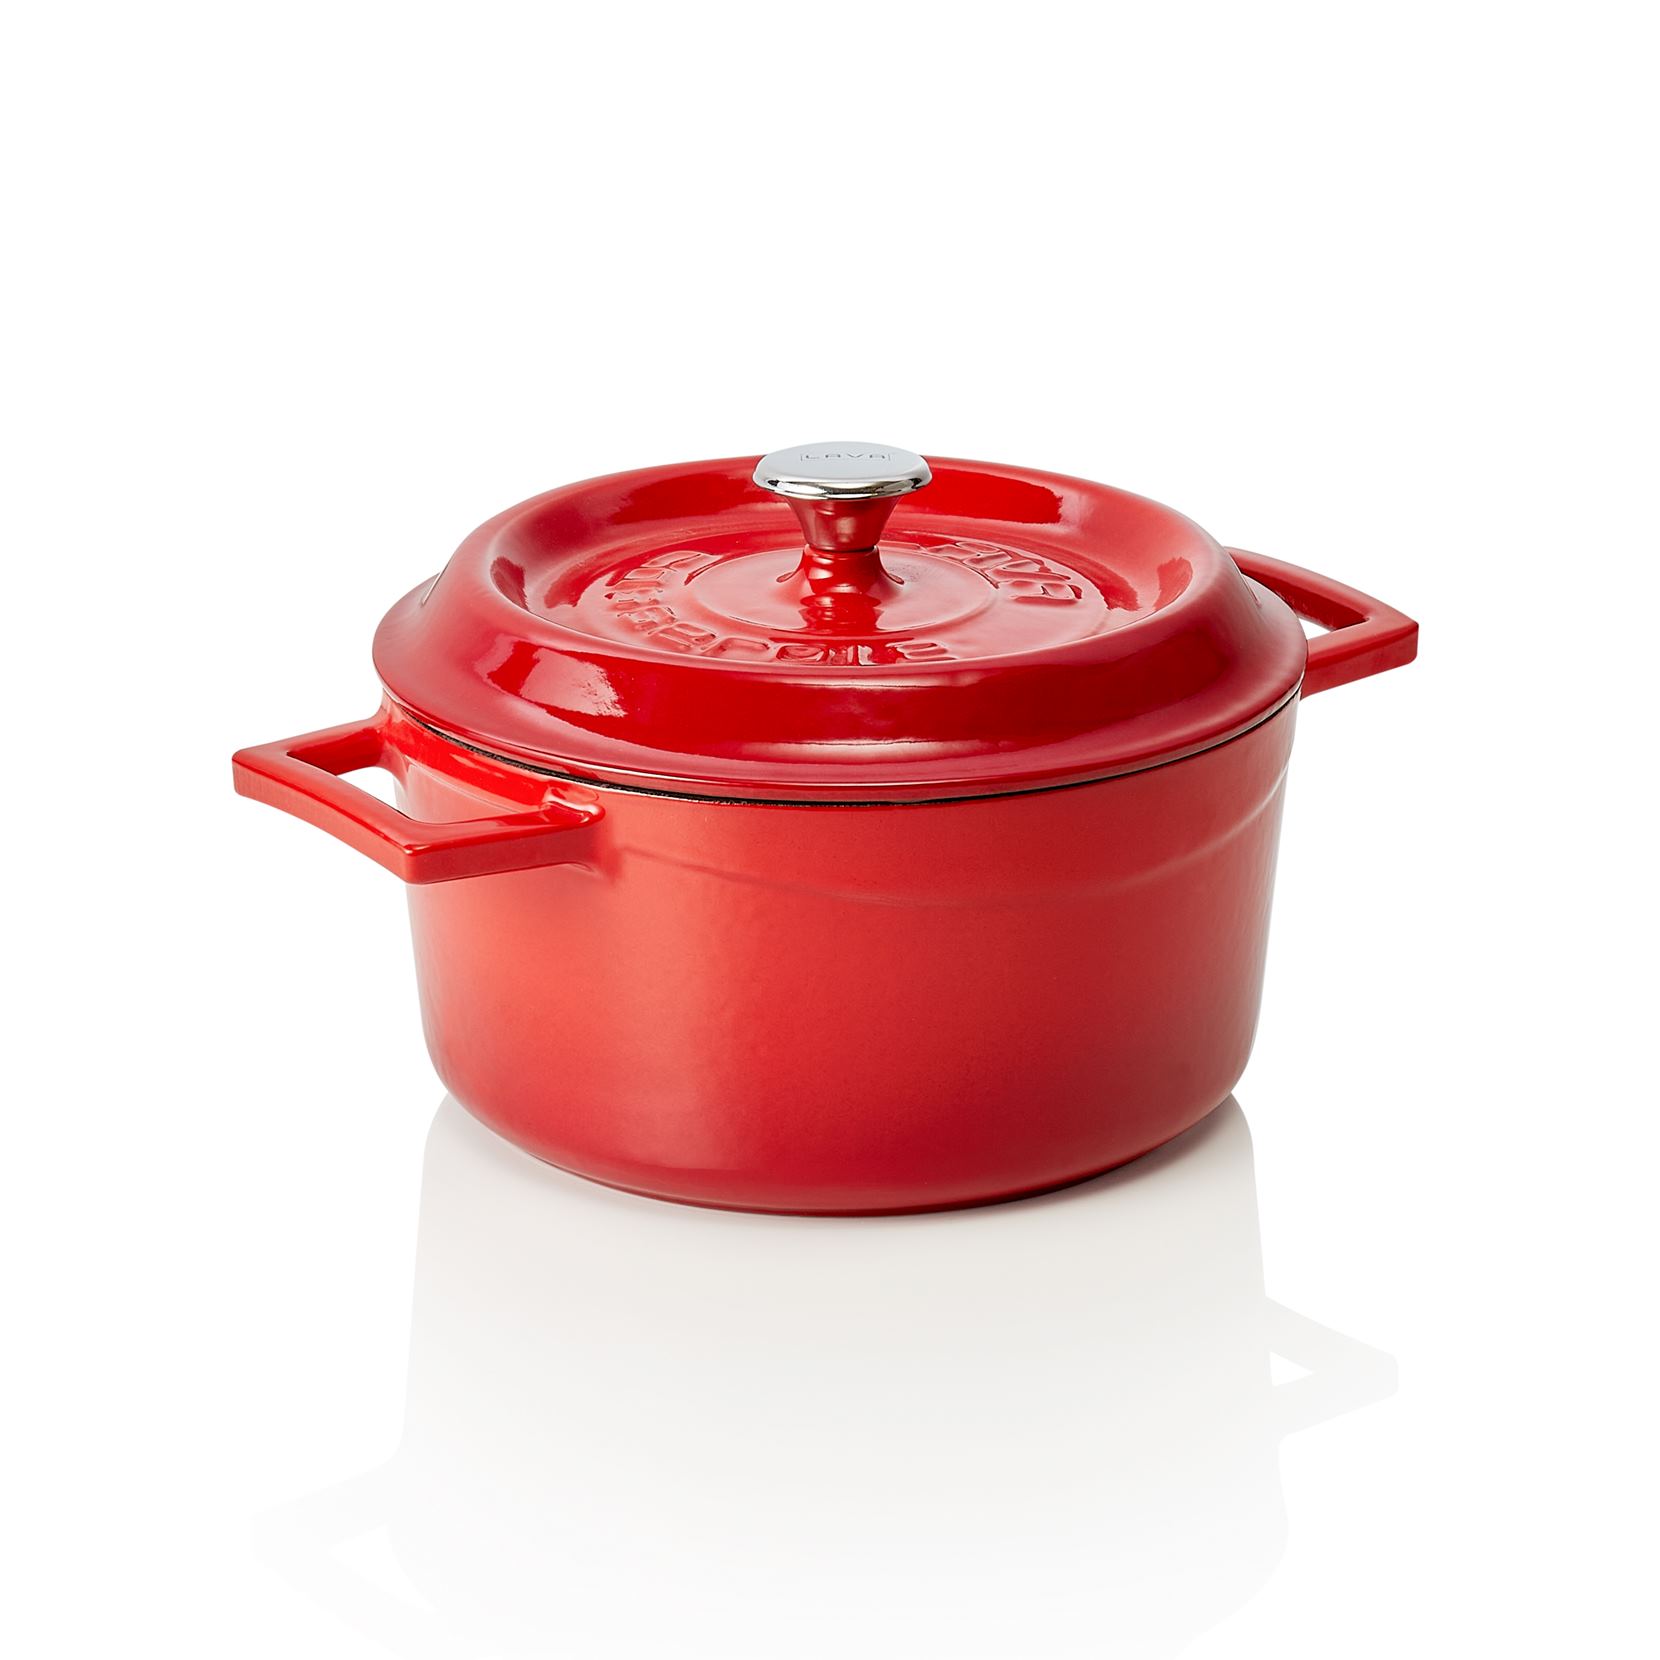 Cocotte LAVA®, Ø 21 cm, rot, Gusseisen emailliert